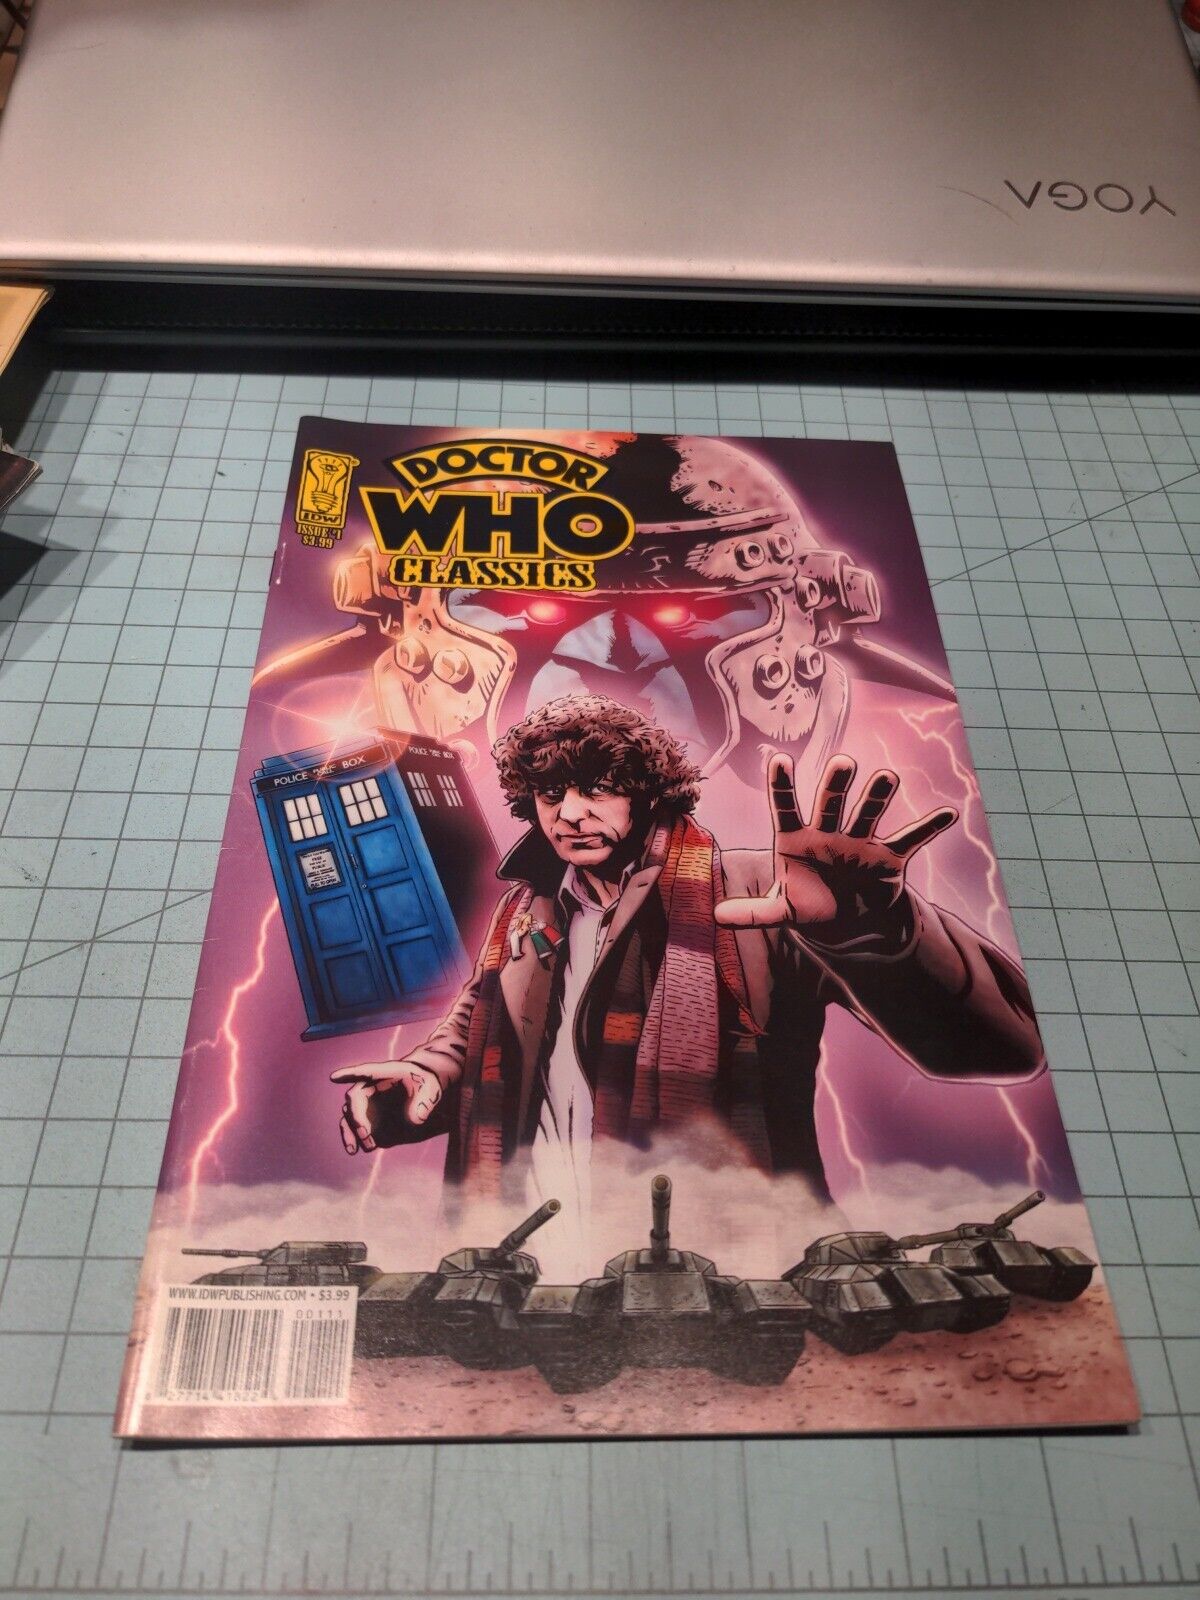 IDW DOCTOR WHO CLASSICS VOL 1 : PAPERBACK